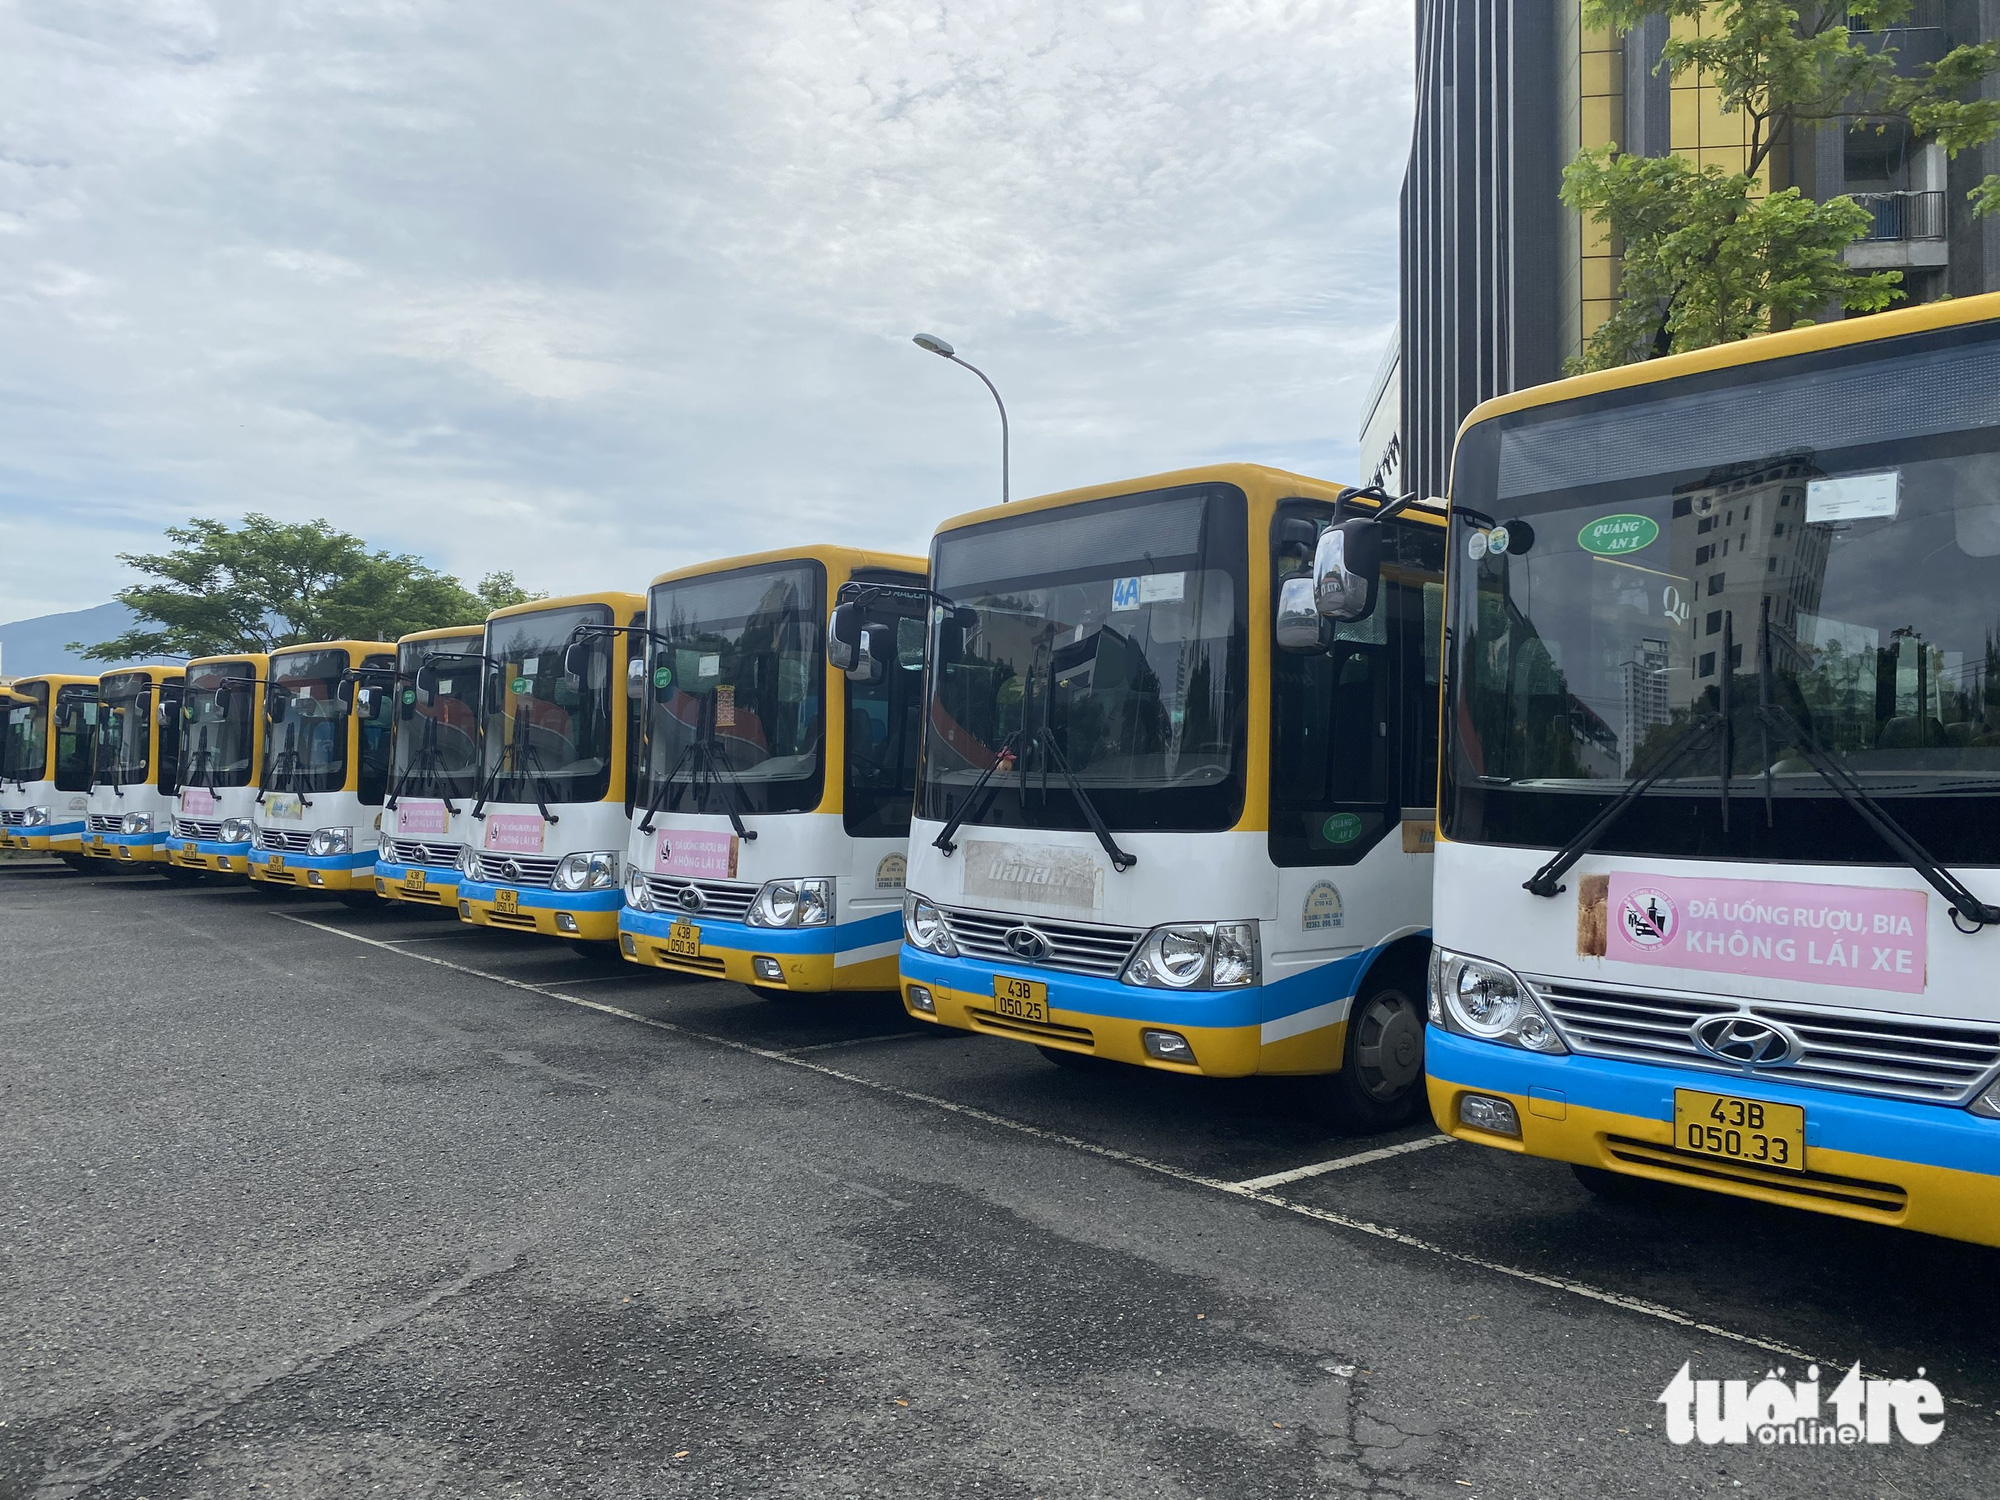 Buses in Da Nang City are left idle as drivers and driving assistants go on a strike. Photo: Truong Trung / Tuoi Tre